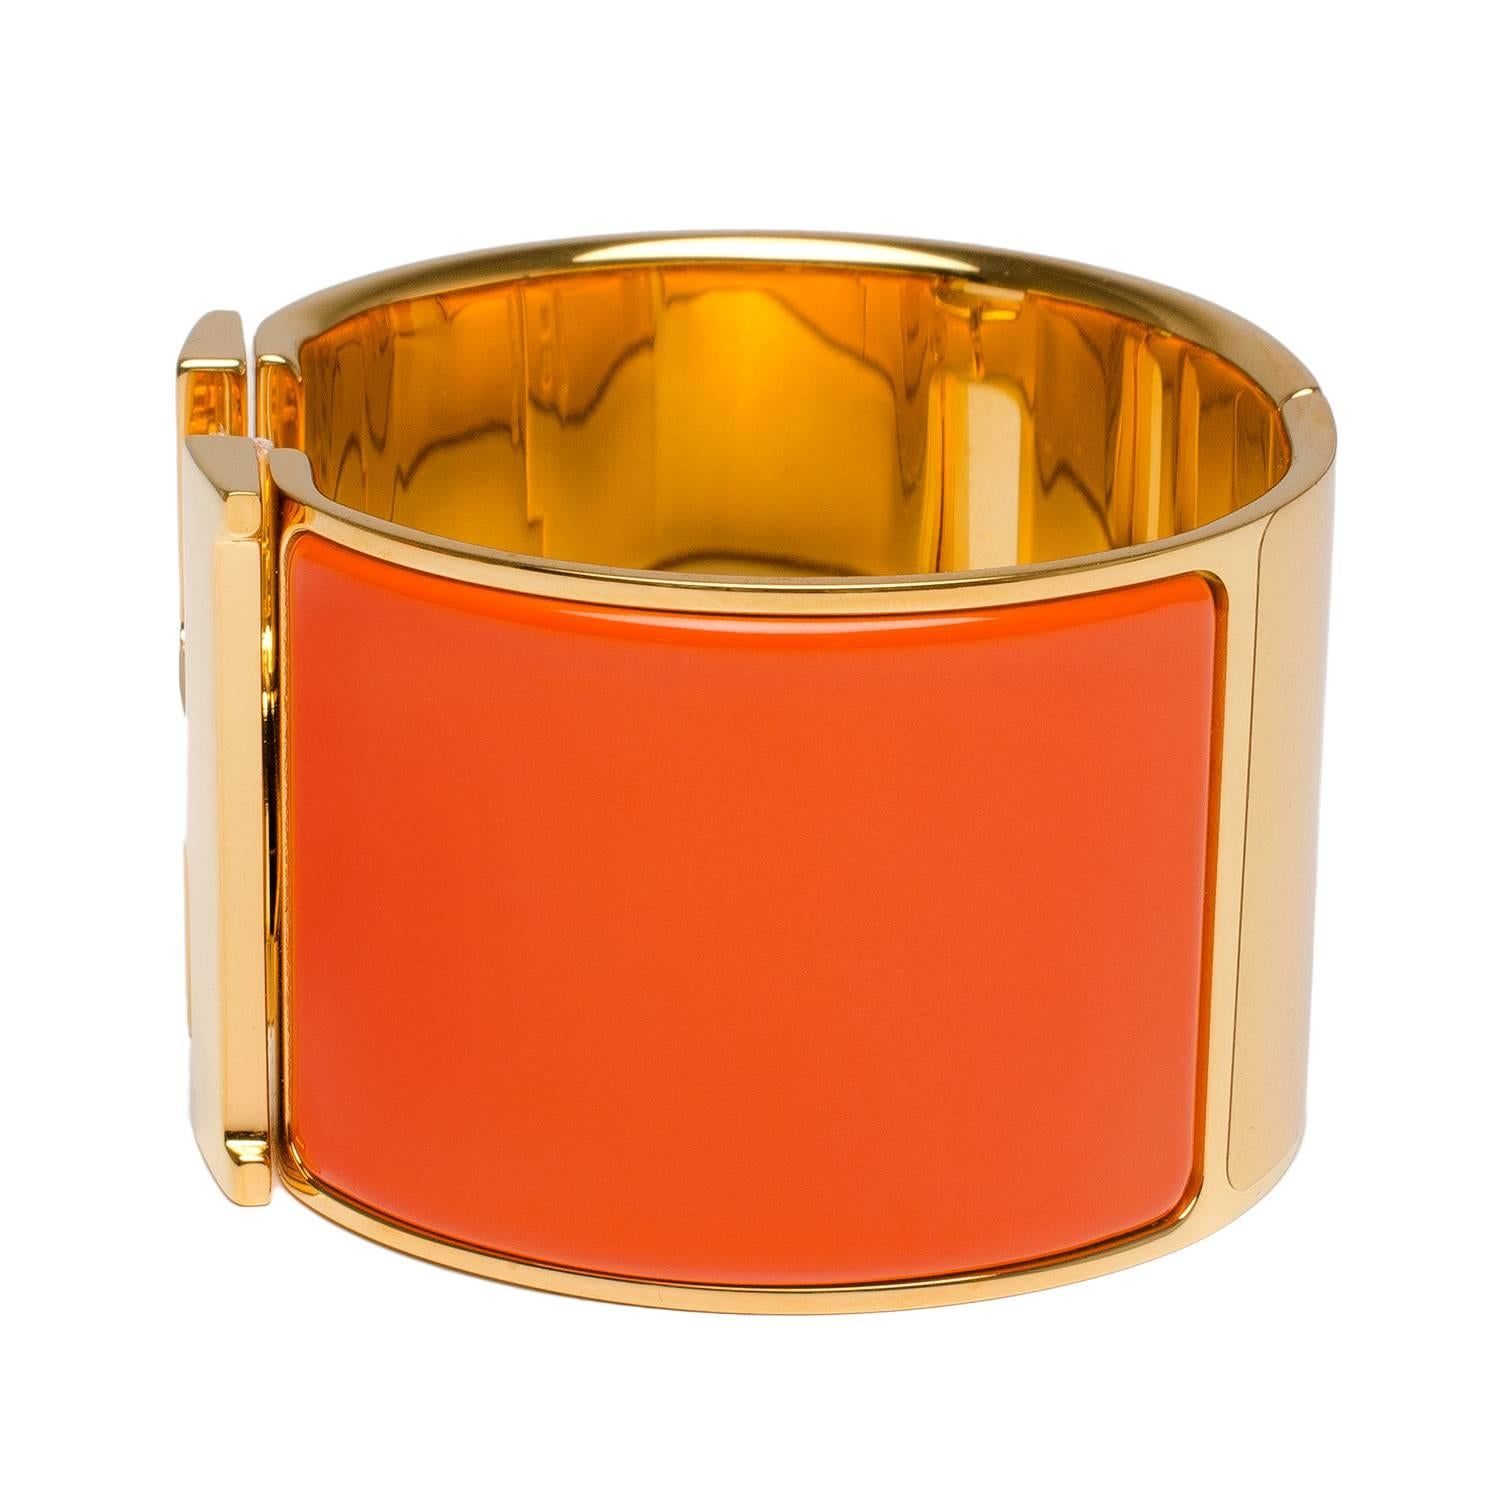 Hermes extra wide Clic Clac H bracelet in Orange enamel with gold plated hardware in size PM.

Origin: France

Condition: Never Carried

Accompanied by: Hermes box, Ribbon

Measurements: Diameter: 2.25